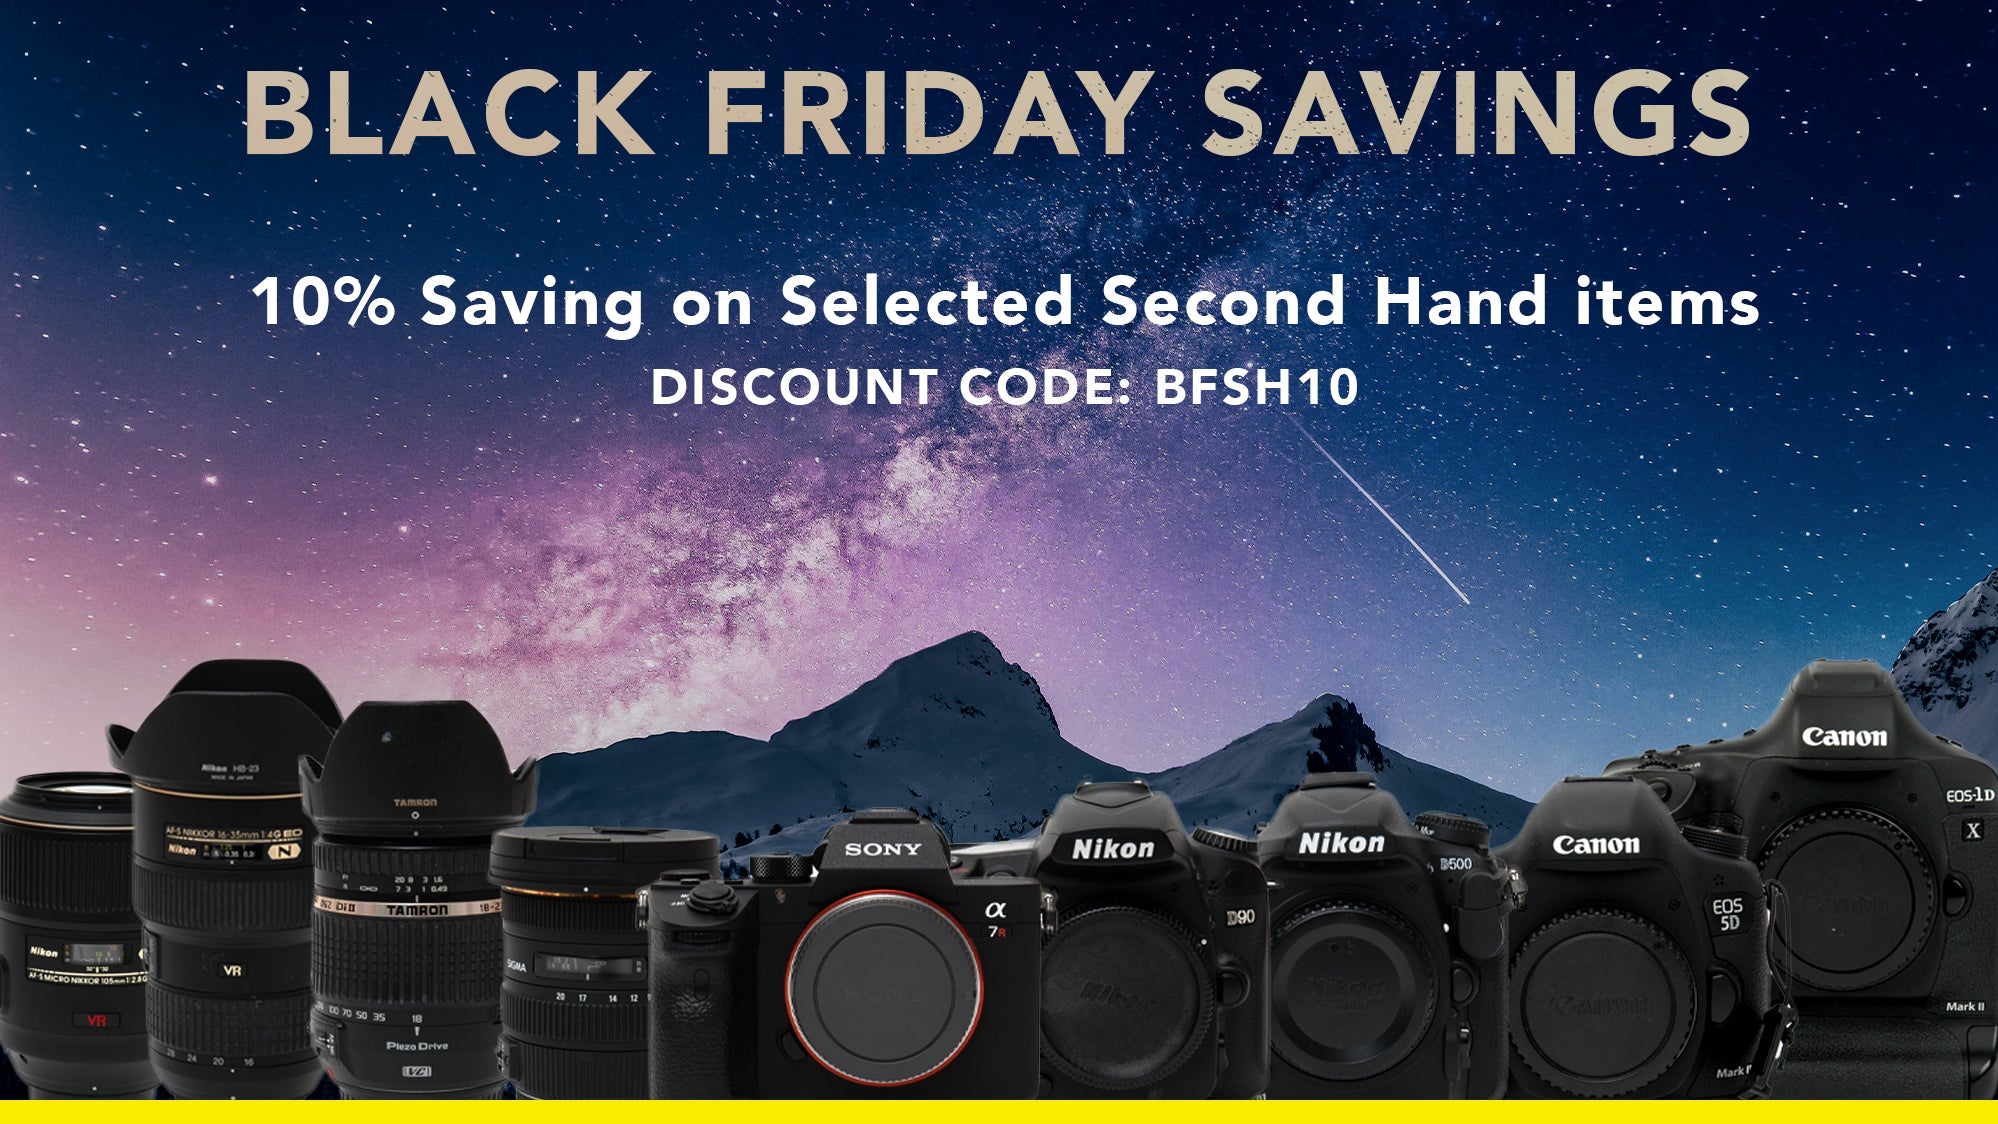 Used Cameras and Lenses BLACK FRIDAY SAVING 2021